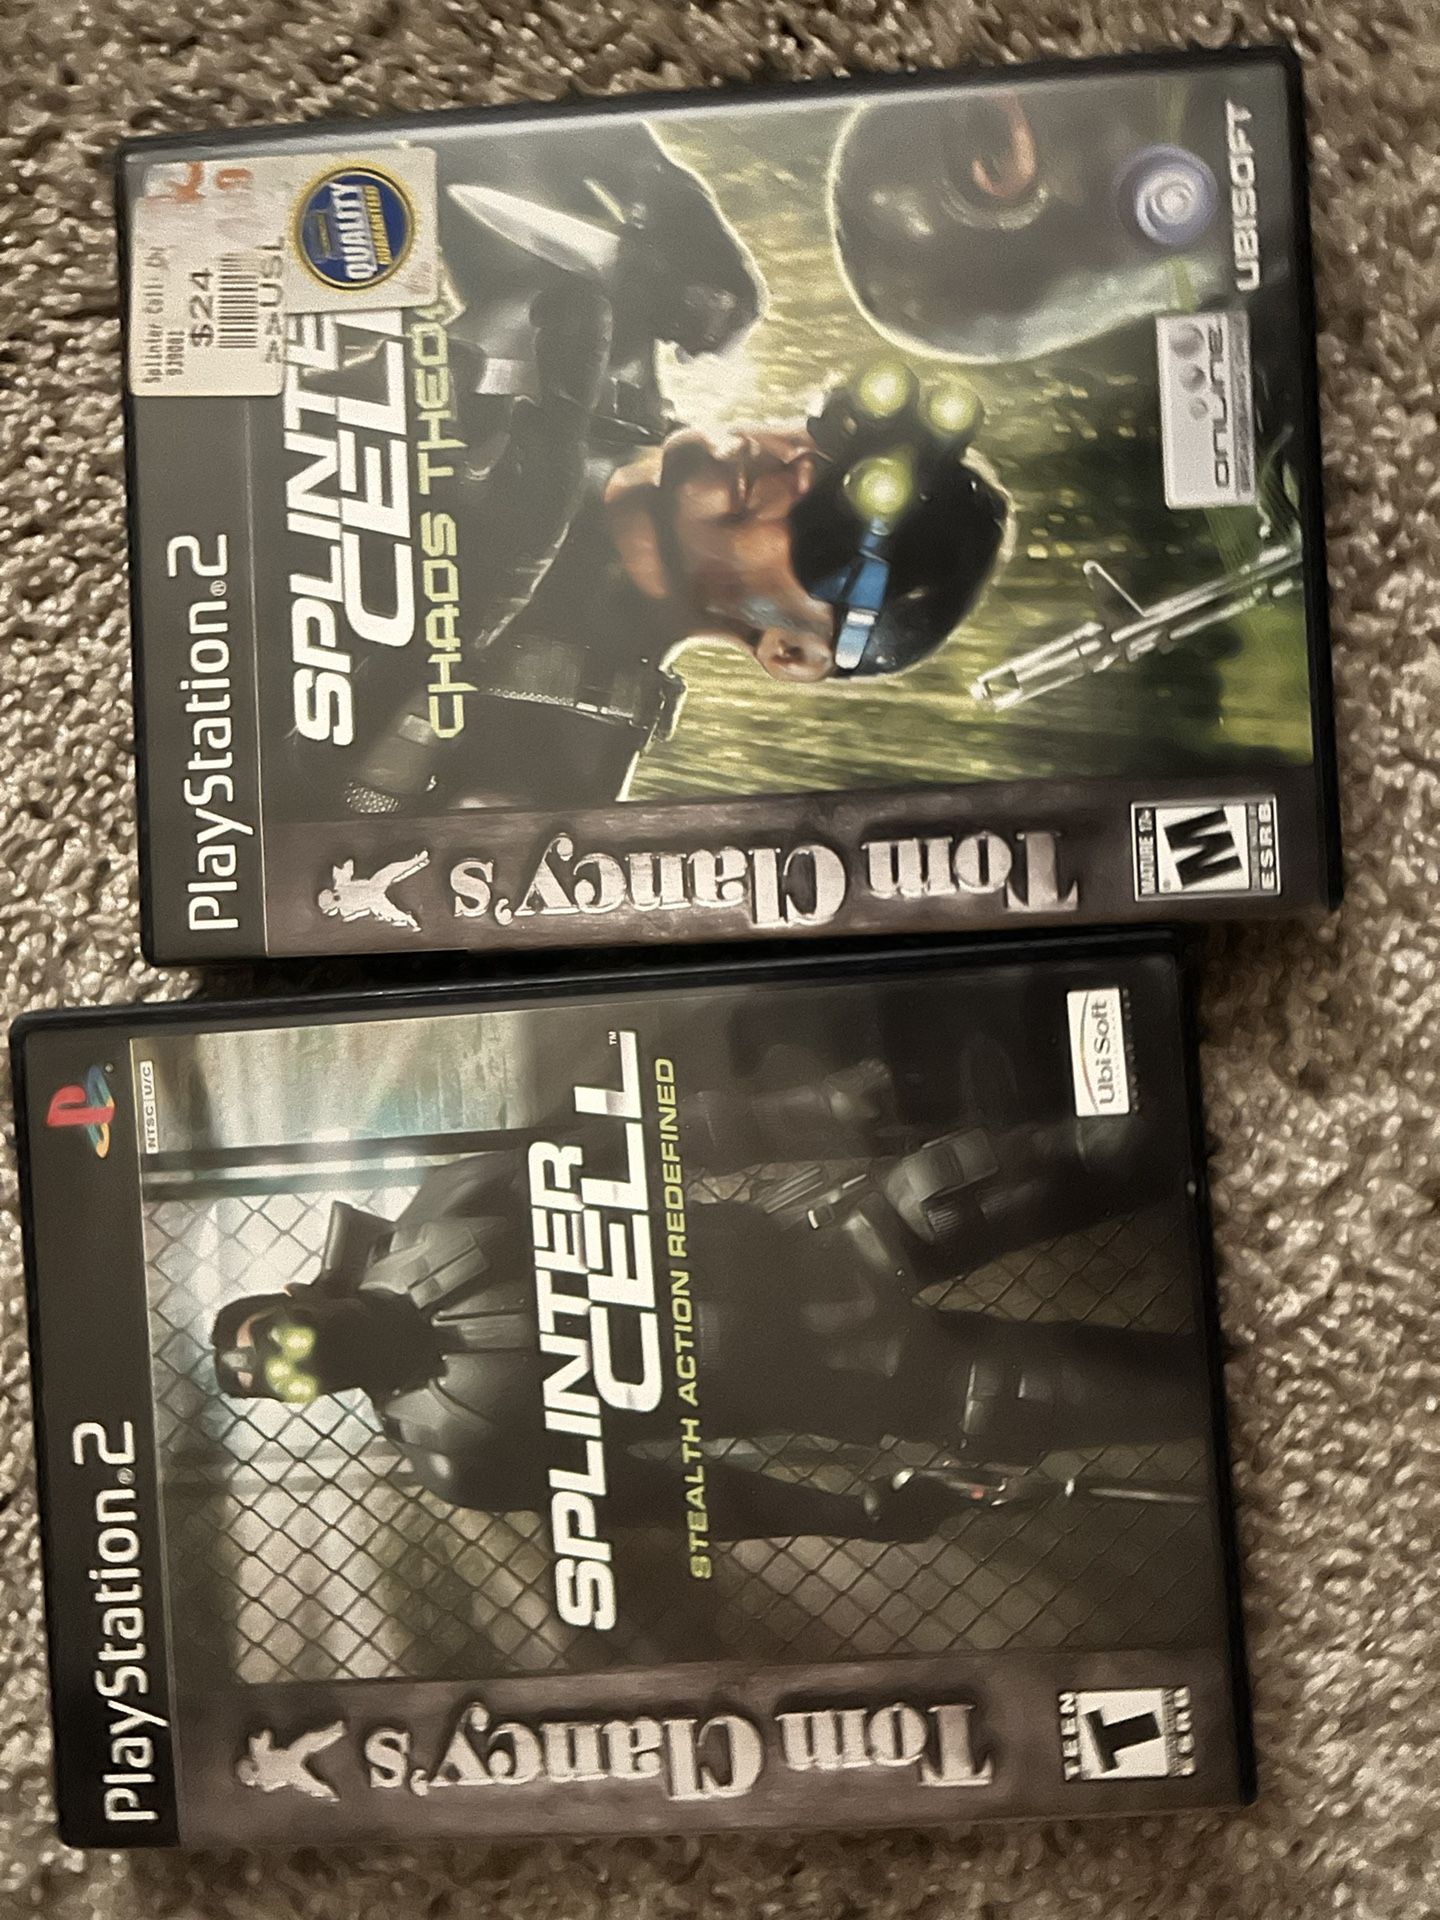 Splinter cell Game For PlayStation 2